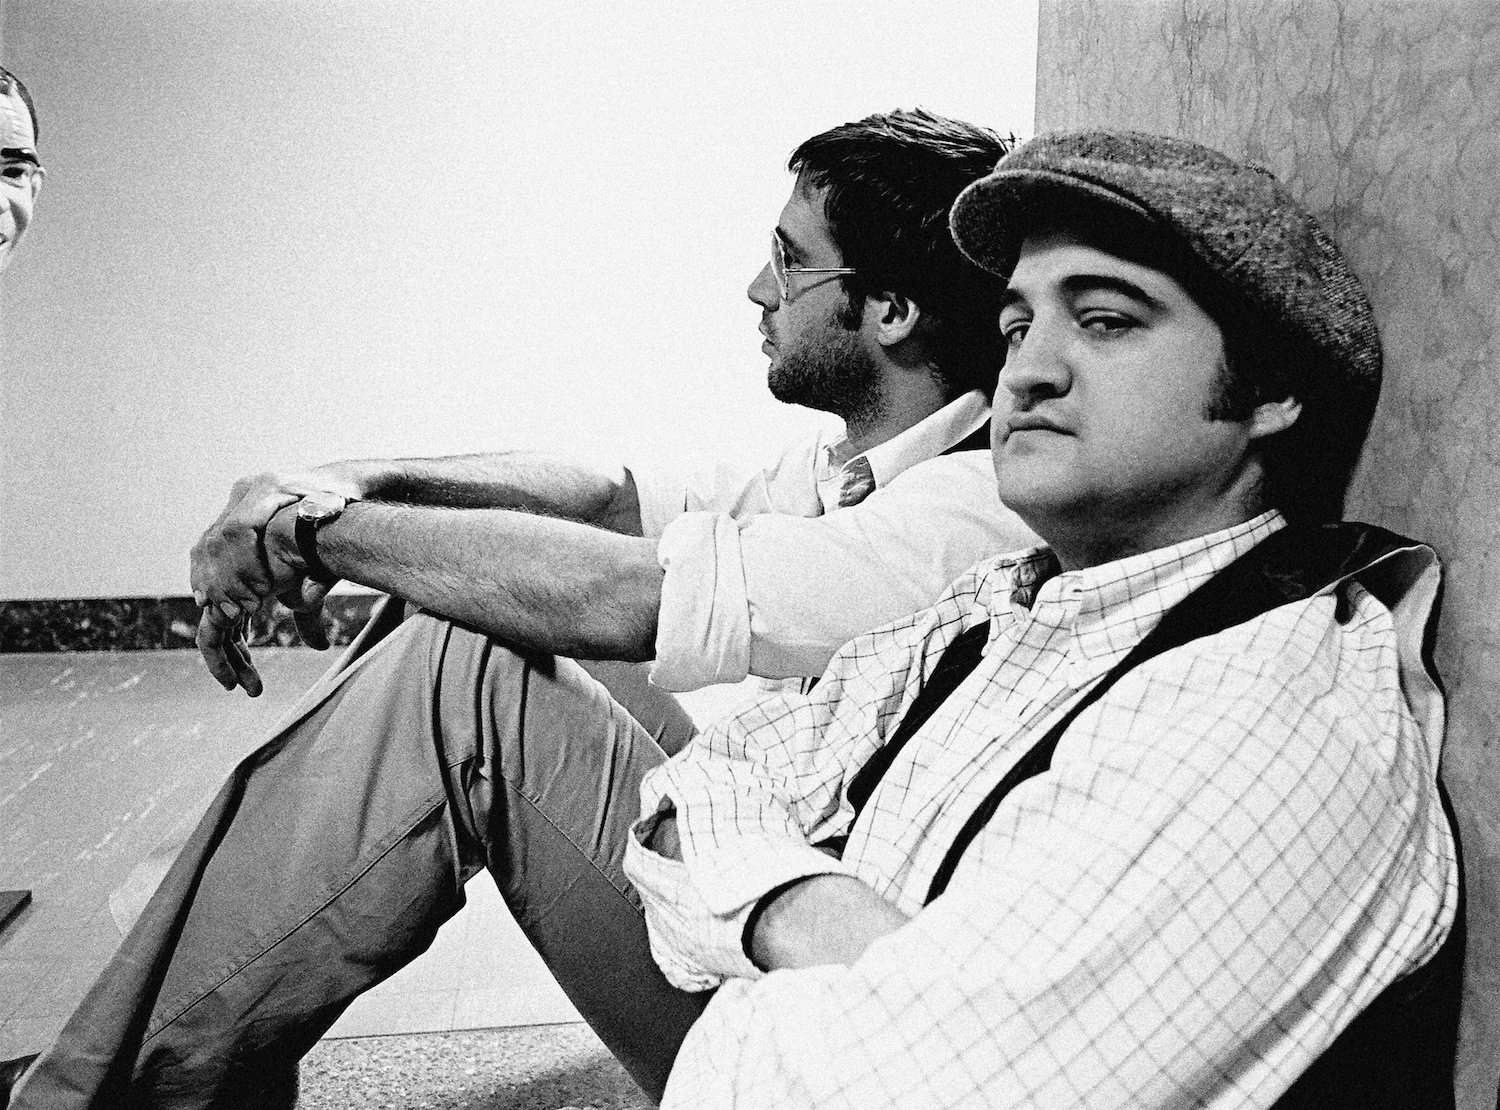 Chevy Chase and John Belushi sitting against a wall during a break from 'Saturday Night Live'